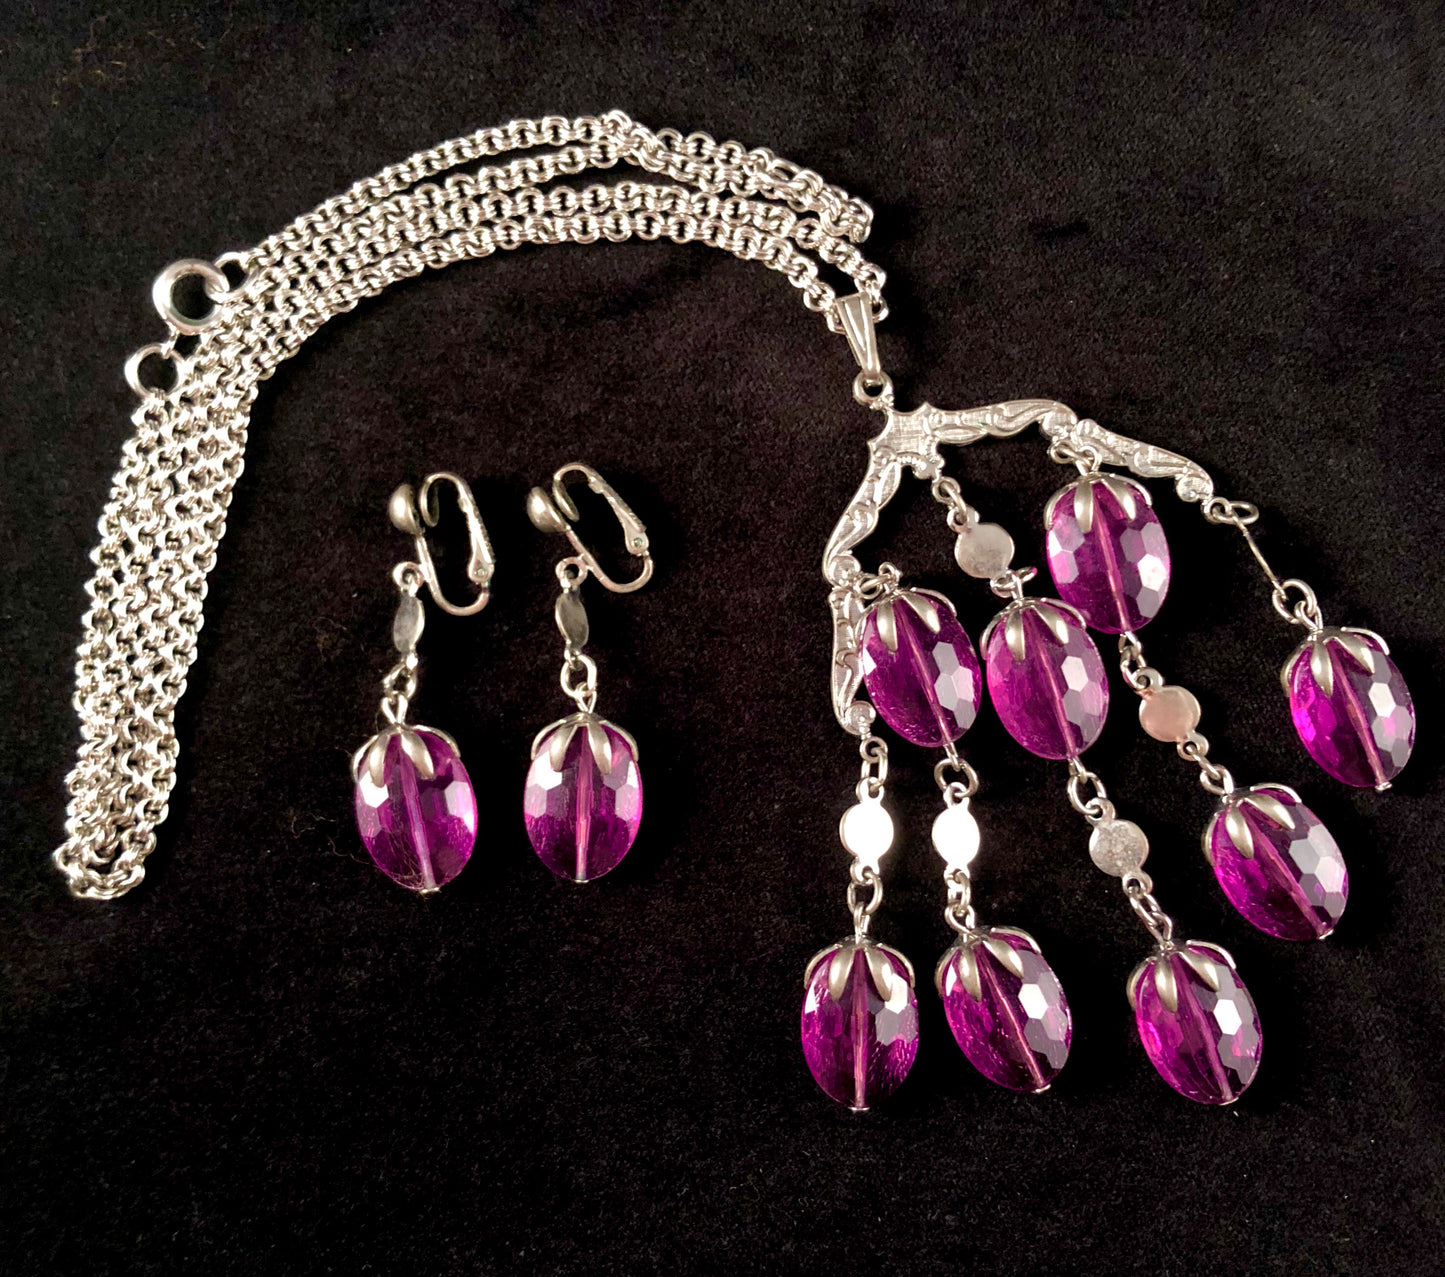 1973 Sarah Coventry Wisteria Necklace & Earrings - Retro Kandy Vintage